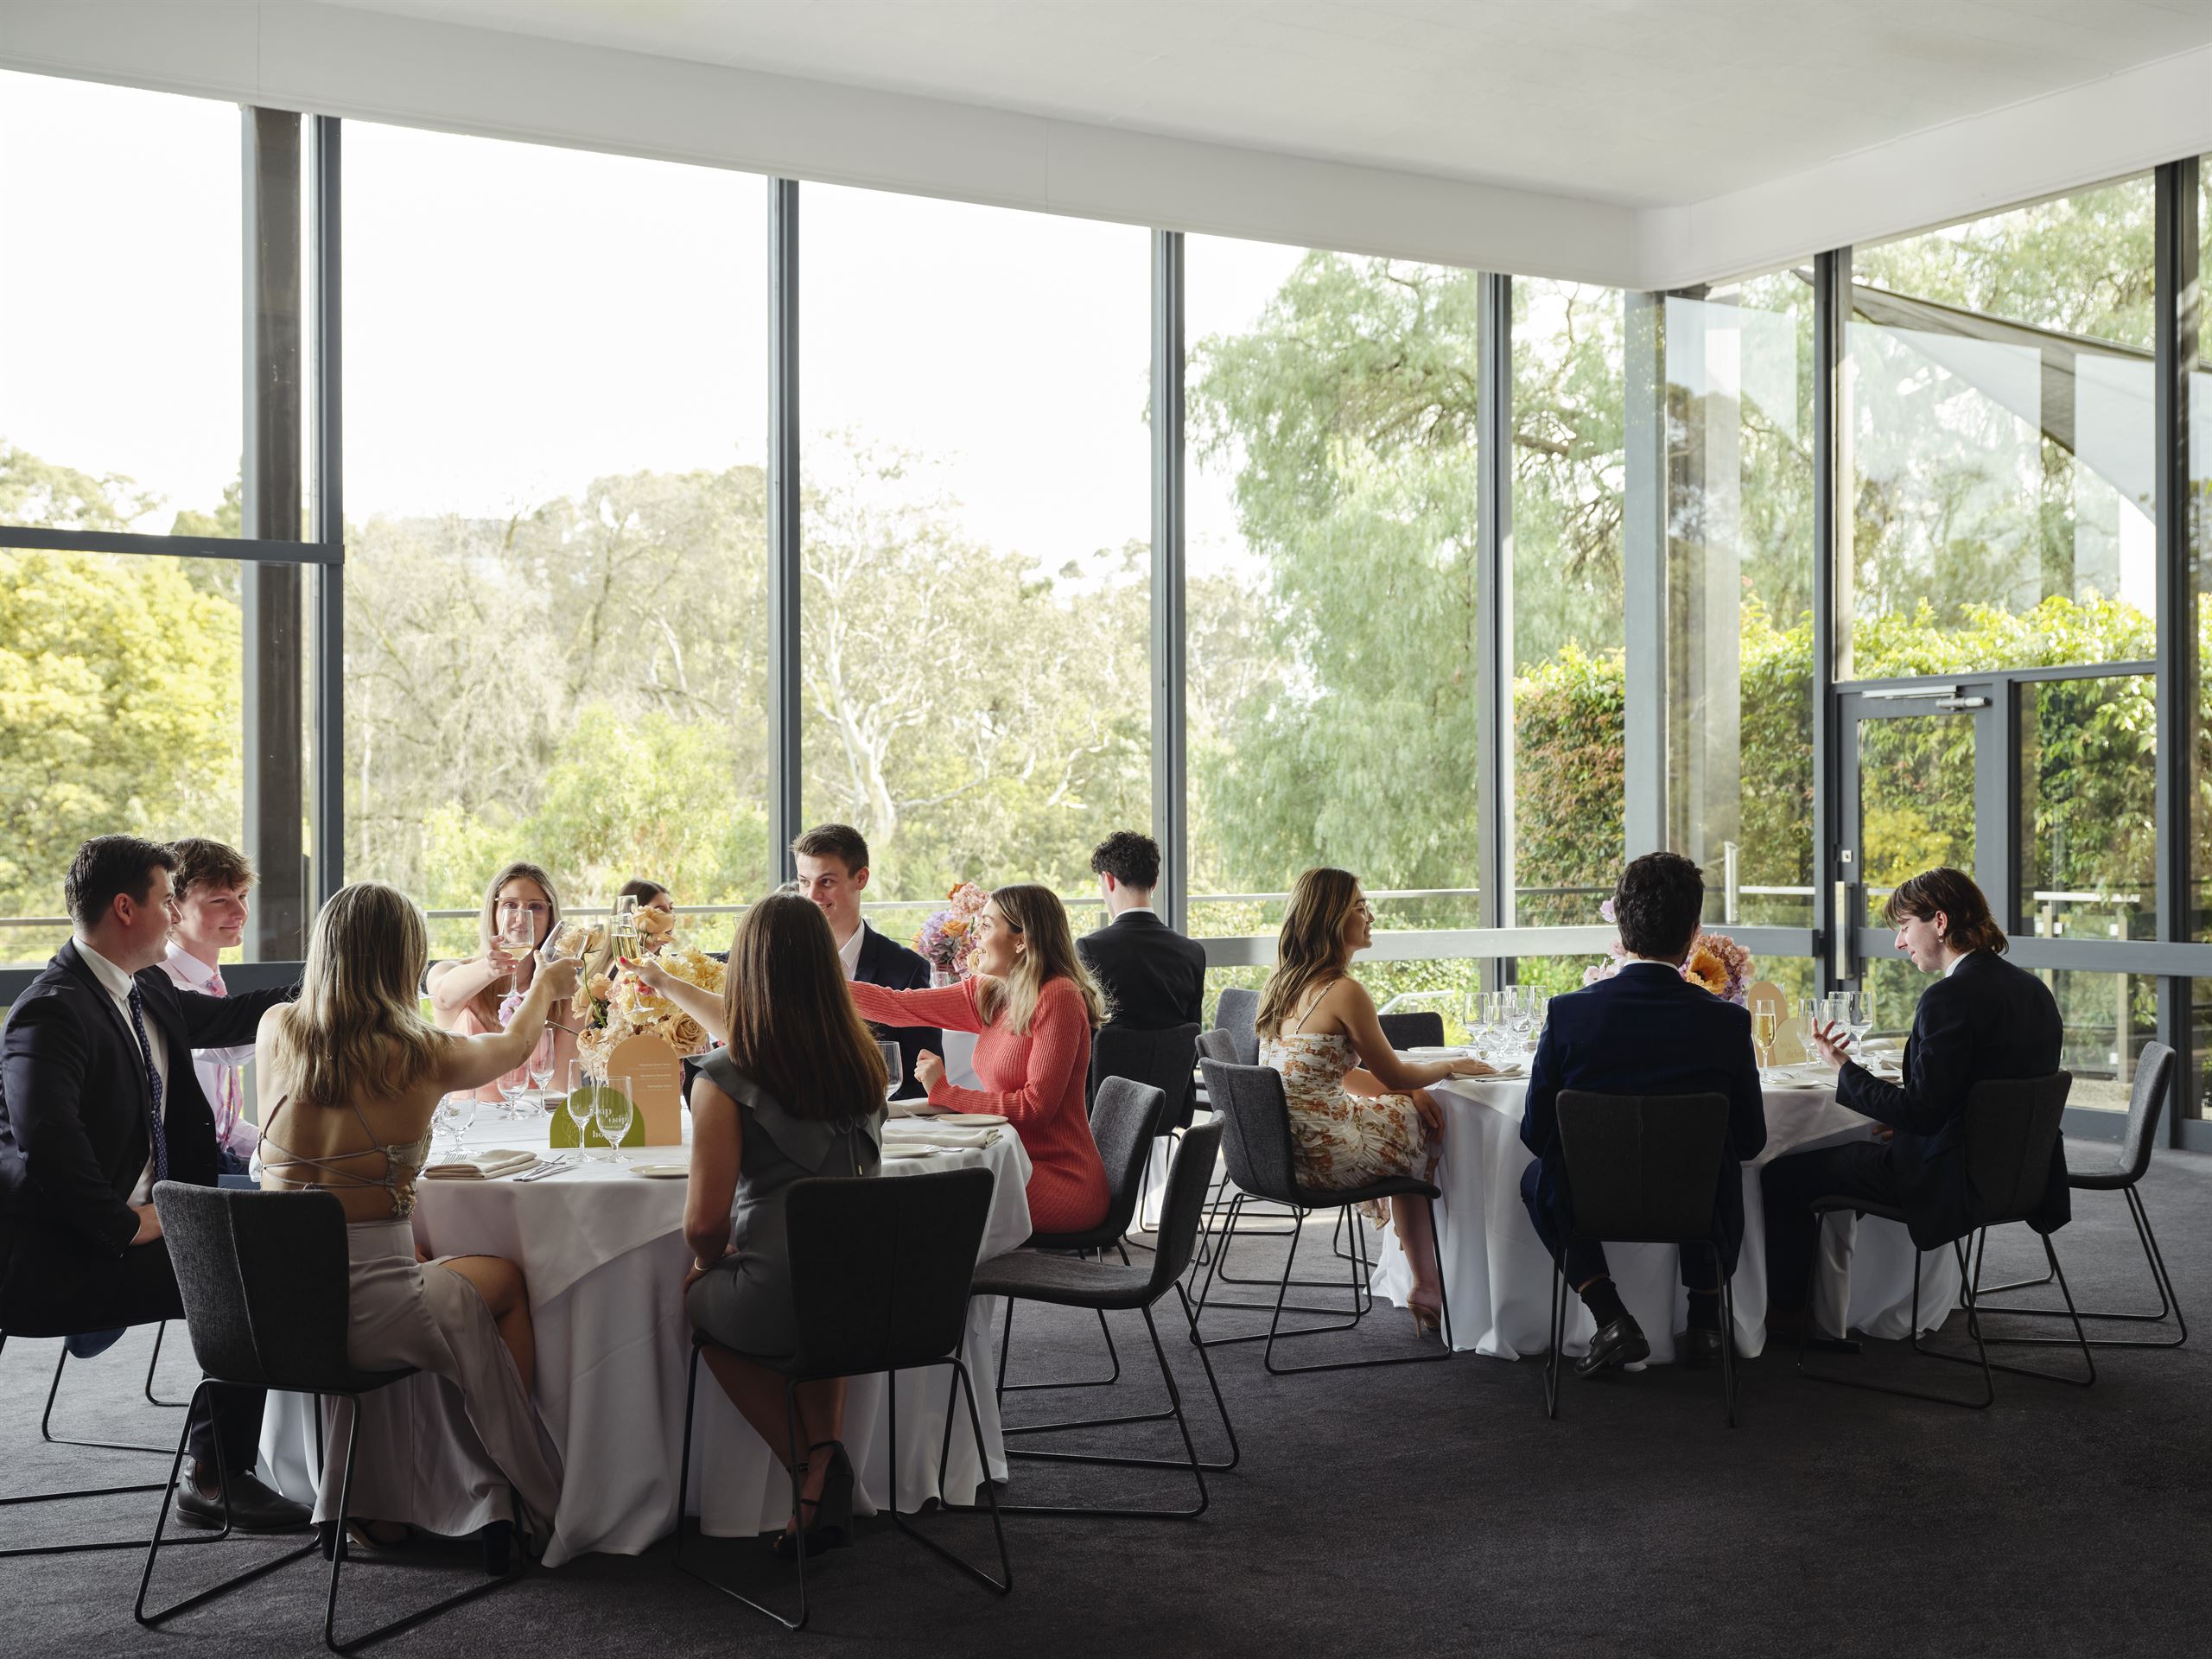 Christmas event spaces in Melbourne: Festive decorations, spacious venues, and joyful ambiance for your holiday celebrations.